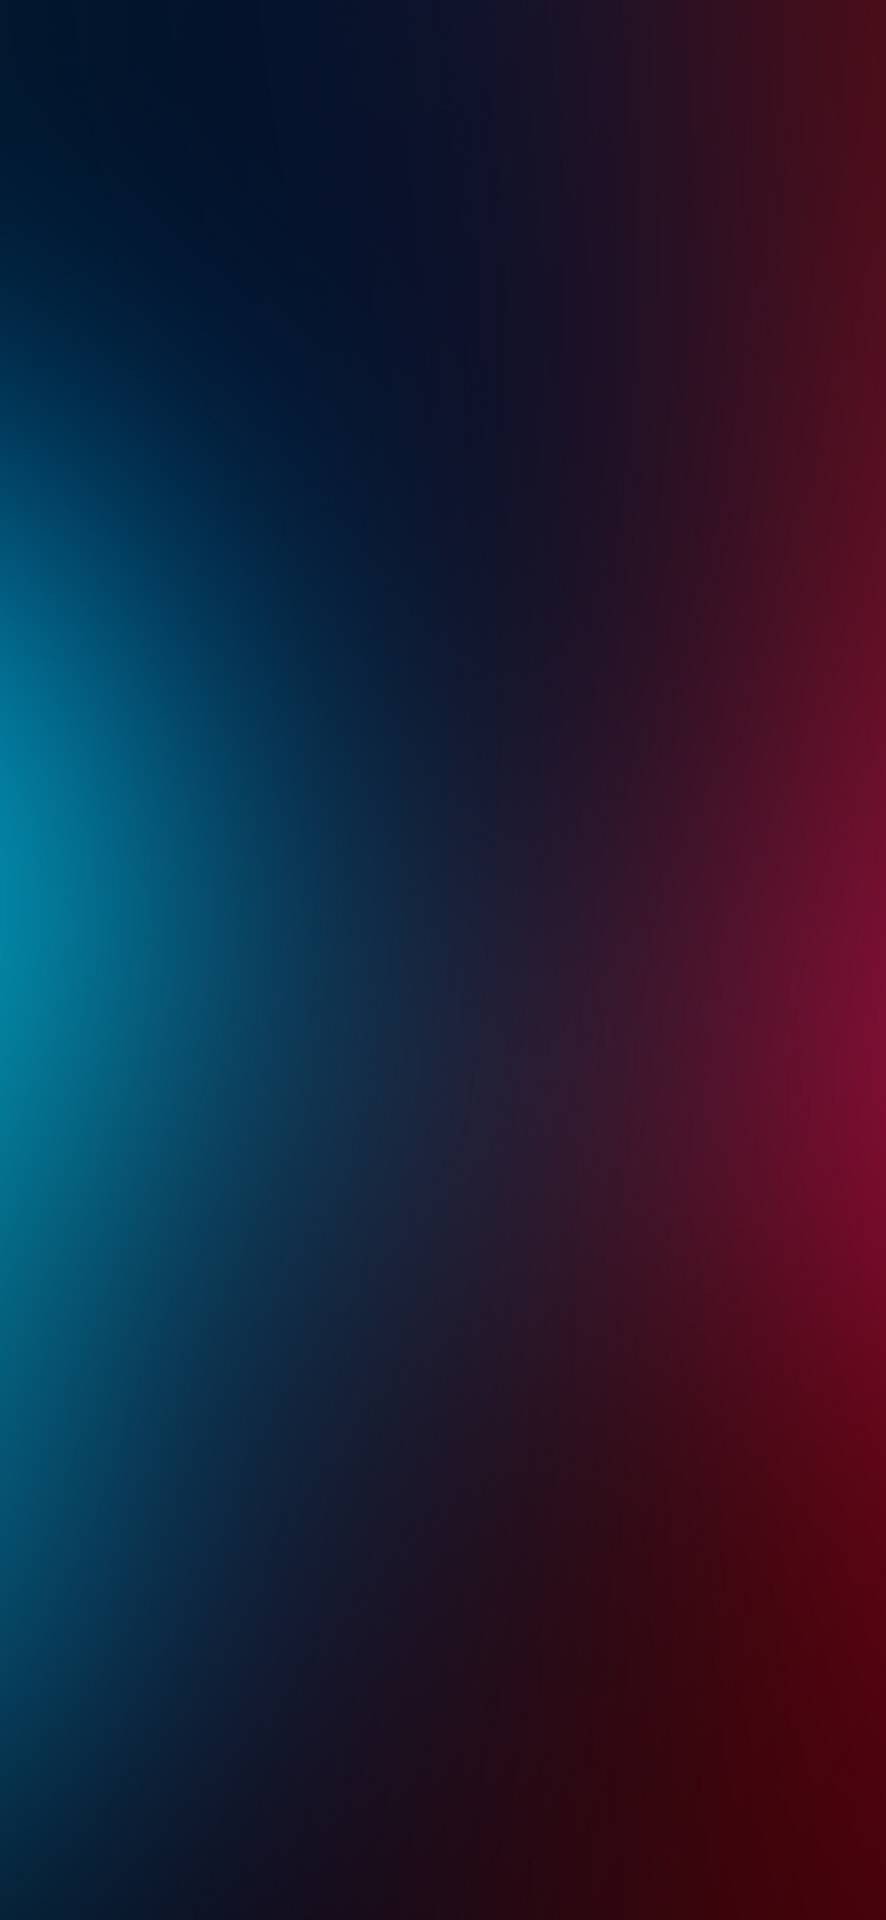 Gradient Background Wallpaper – S003 - Chill-out Wallpapers